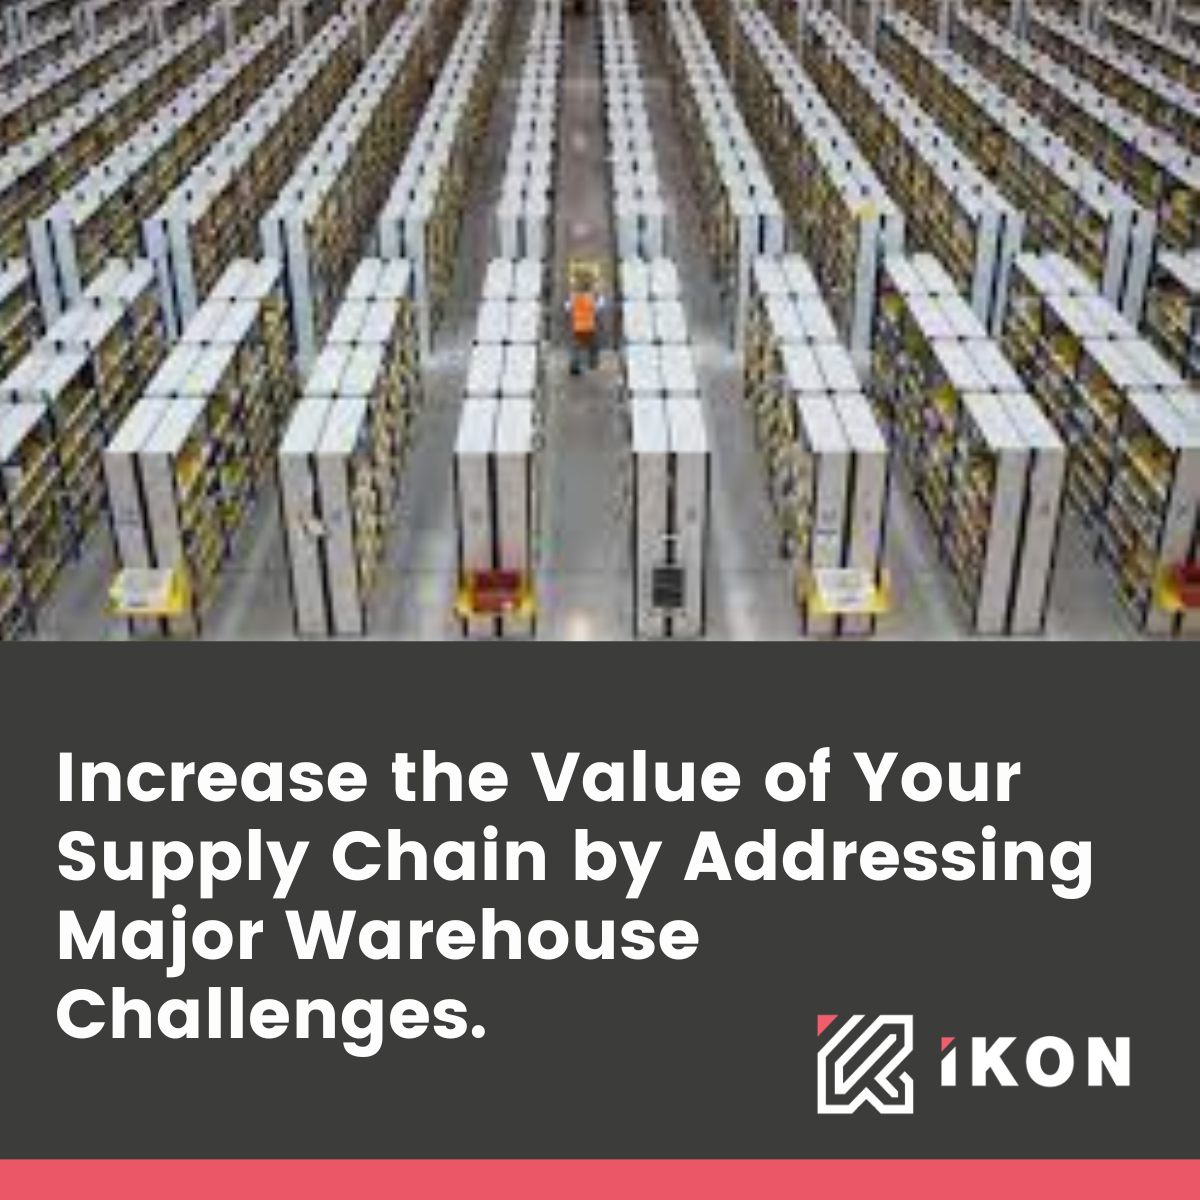 INCREASE THE VALUE OF YOUR SUPPLY CHAIN BY ADDRESSING MAJOR WAREHOUSE CHALLENGES